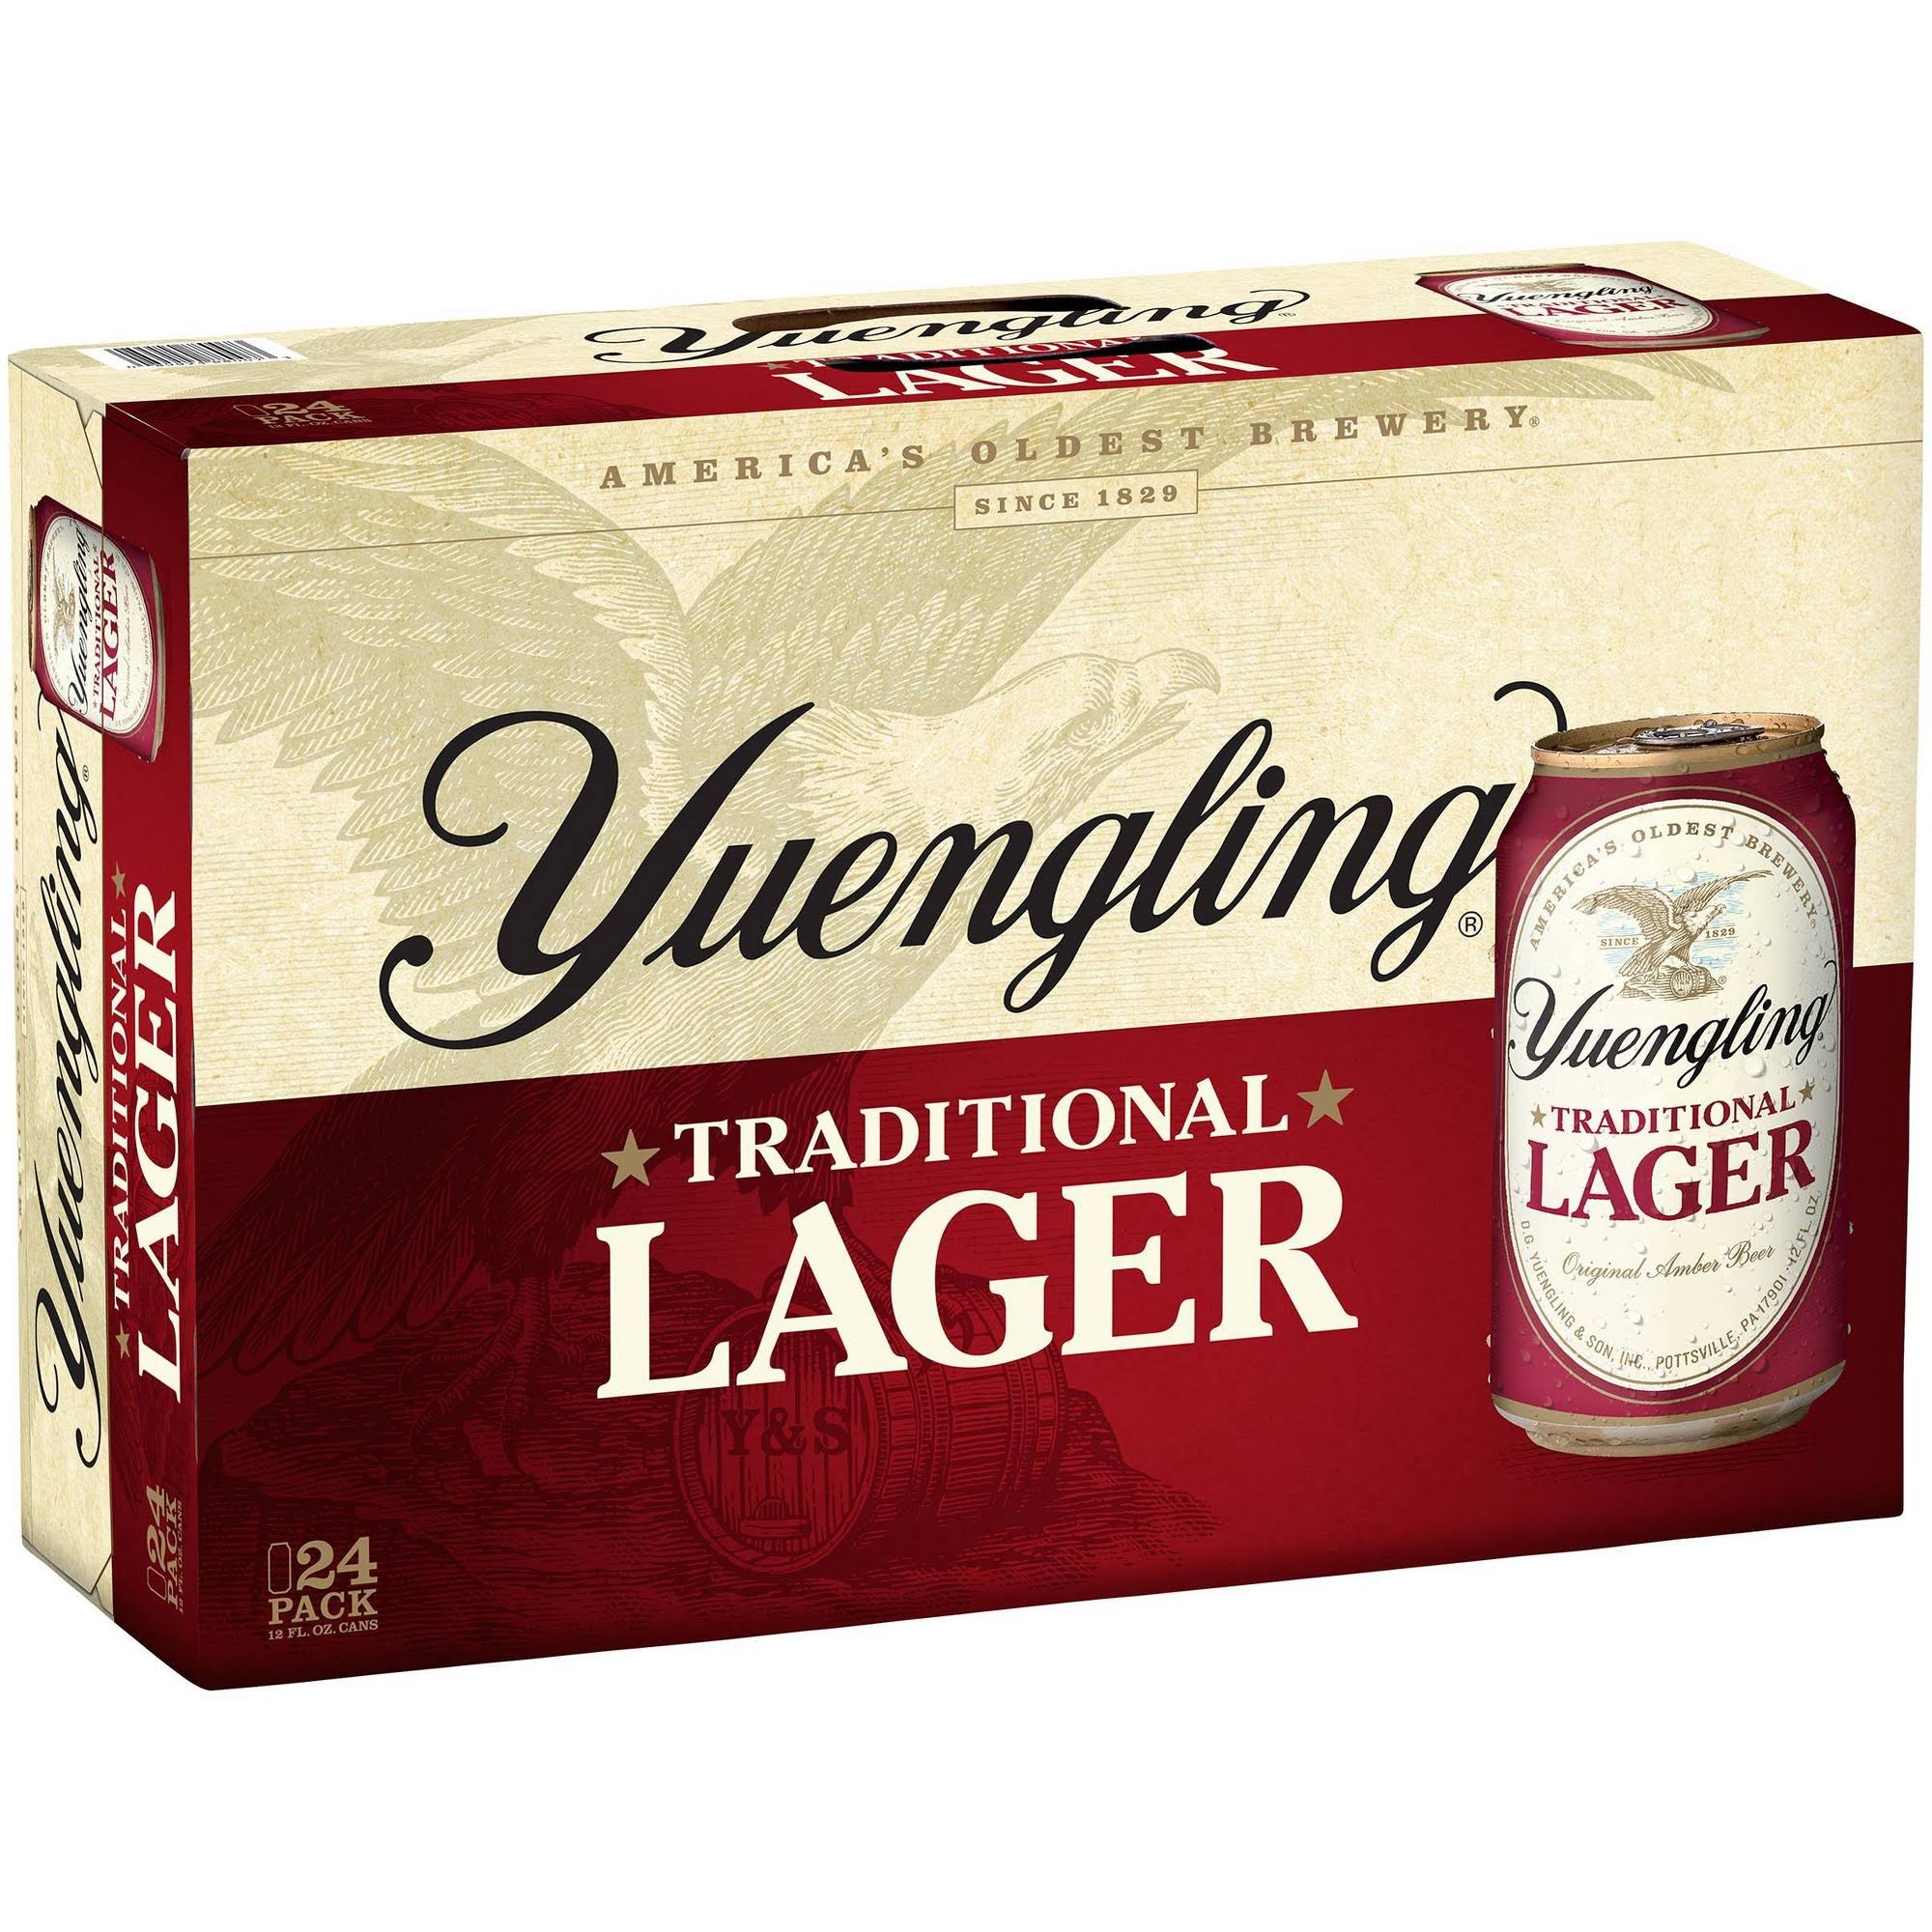 Yuengling Traditional Original Amber Lager - 24 Cans